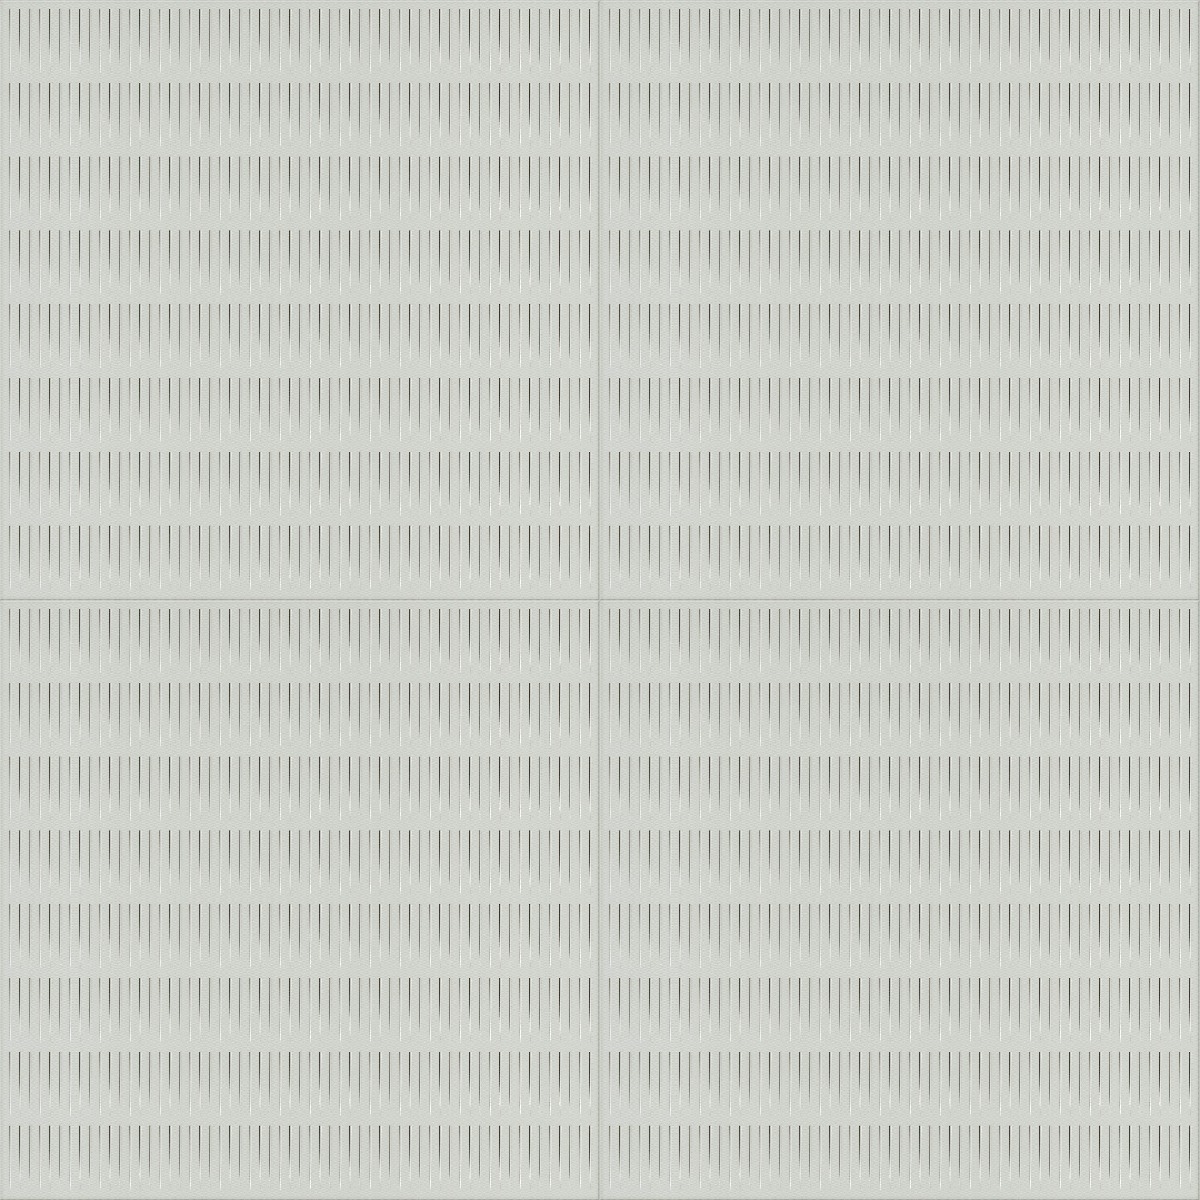 A seamless surfacing texture with h01r ciment units arranged in a Stack pattern